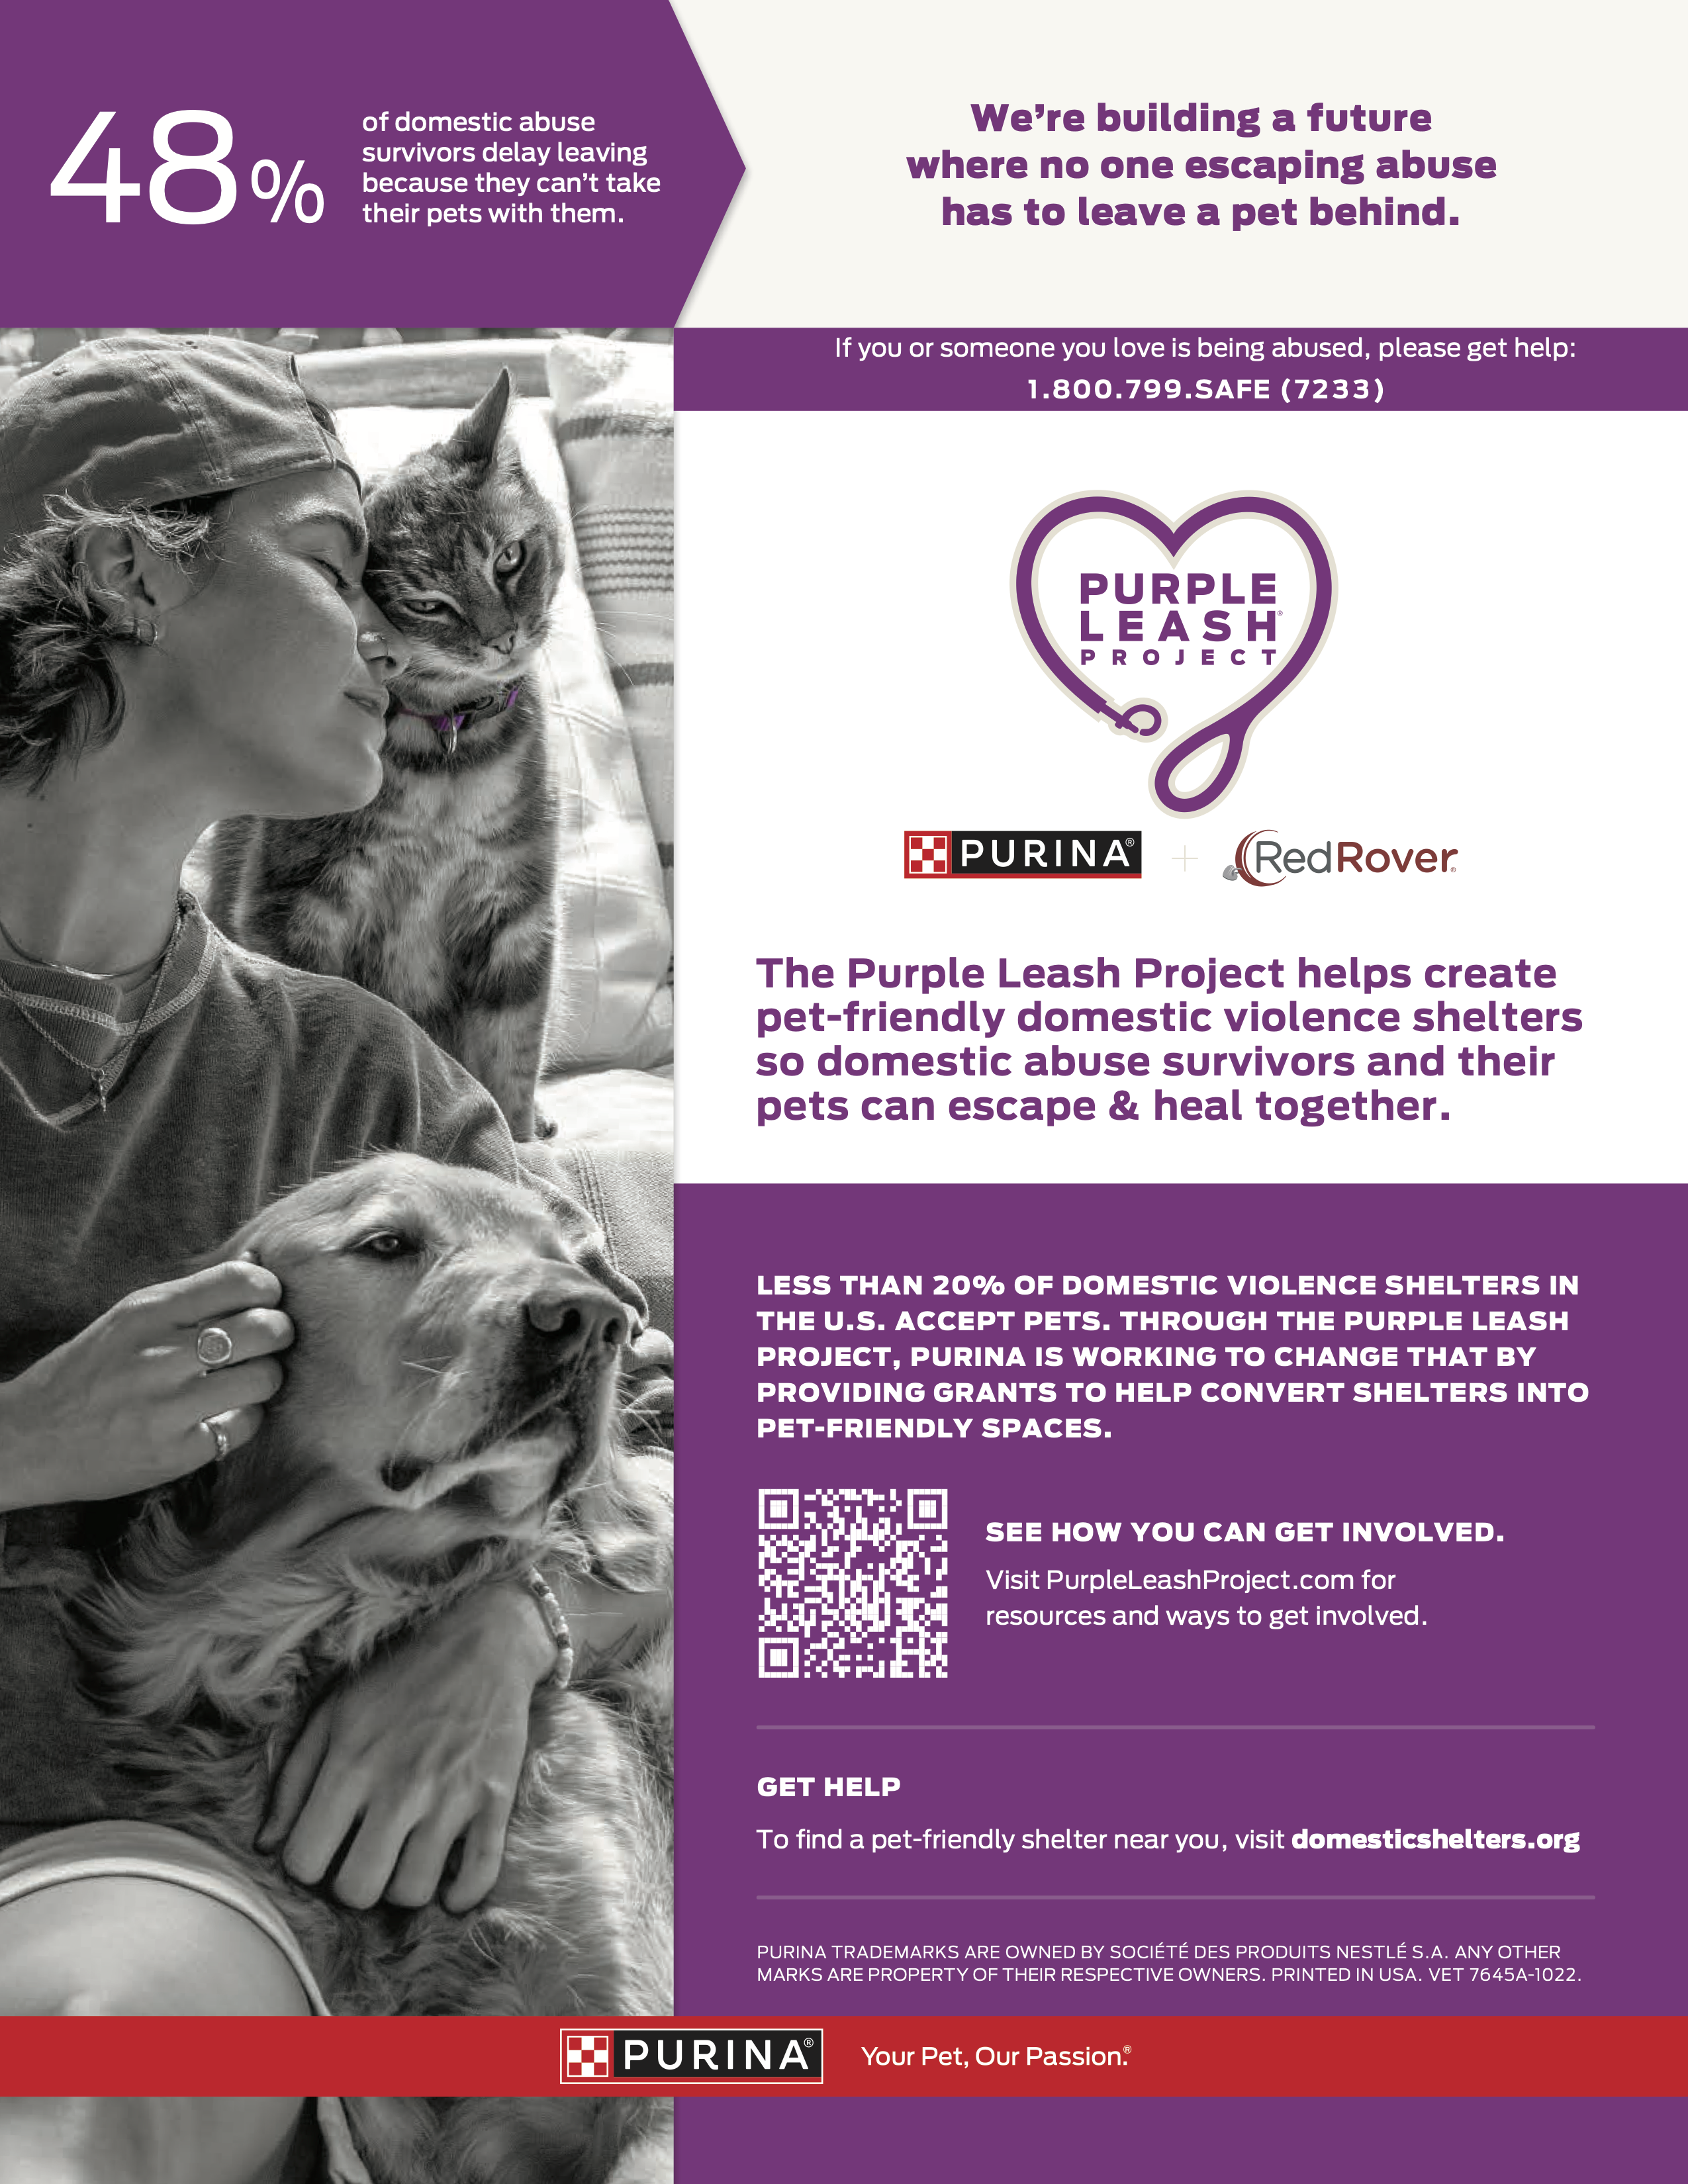 Purple Leash Project flyer outlining statistics on domestic violence survivors and pets